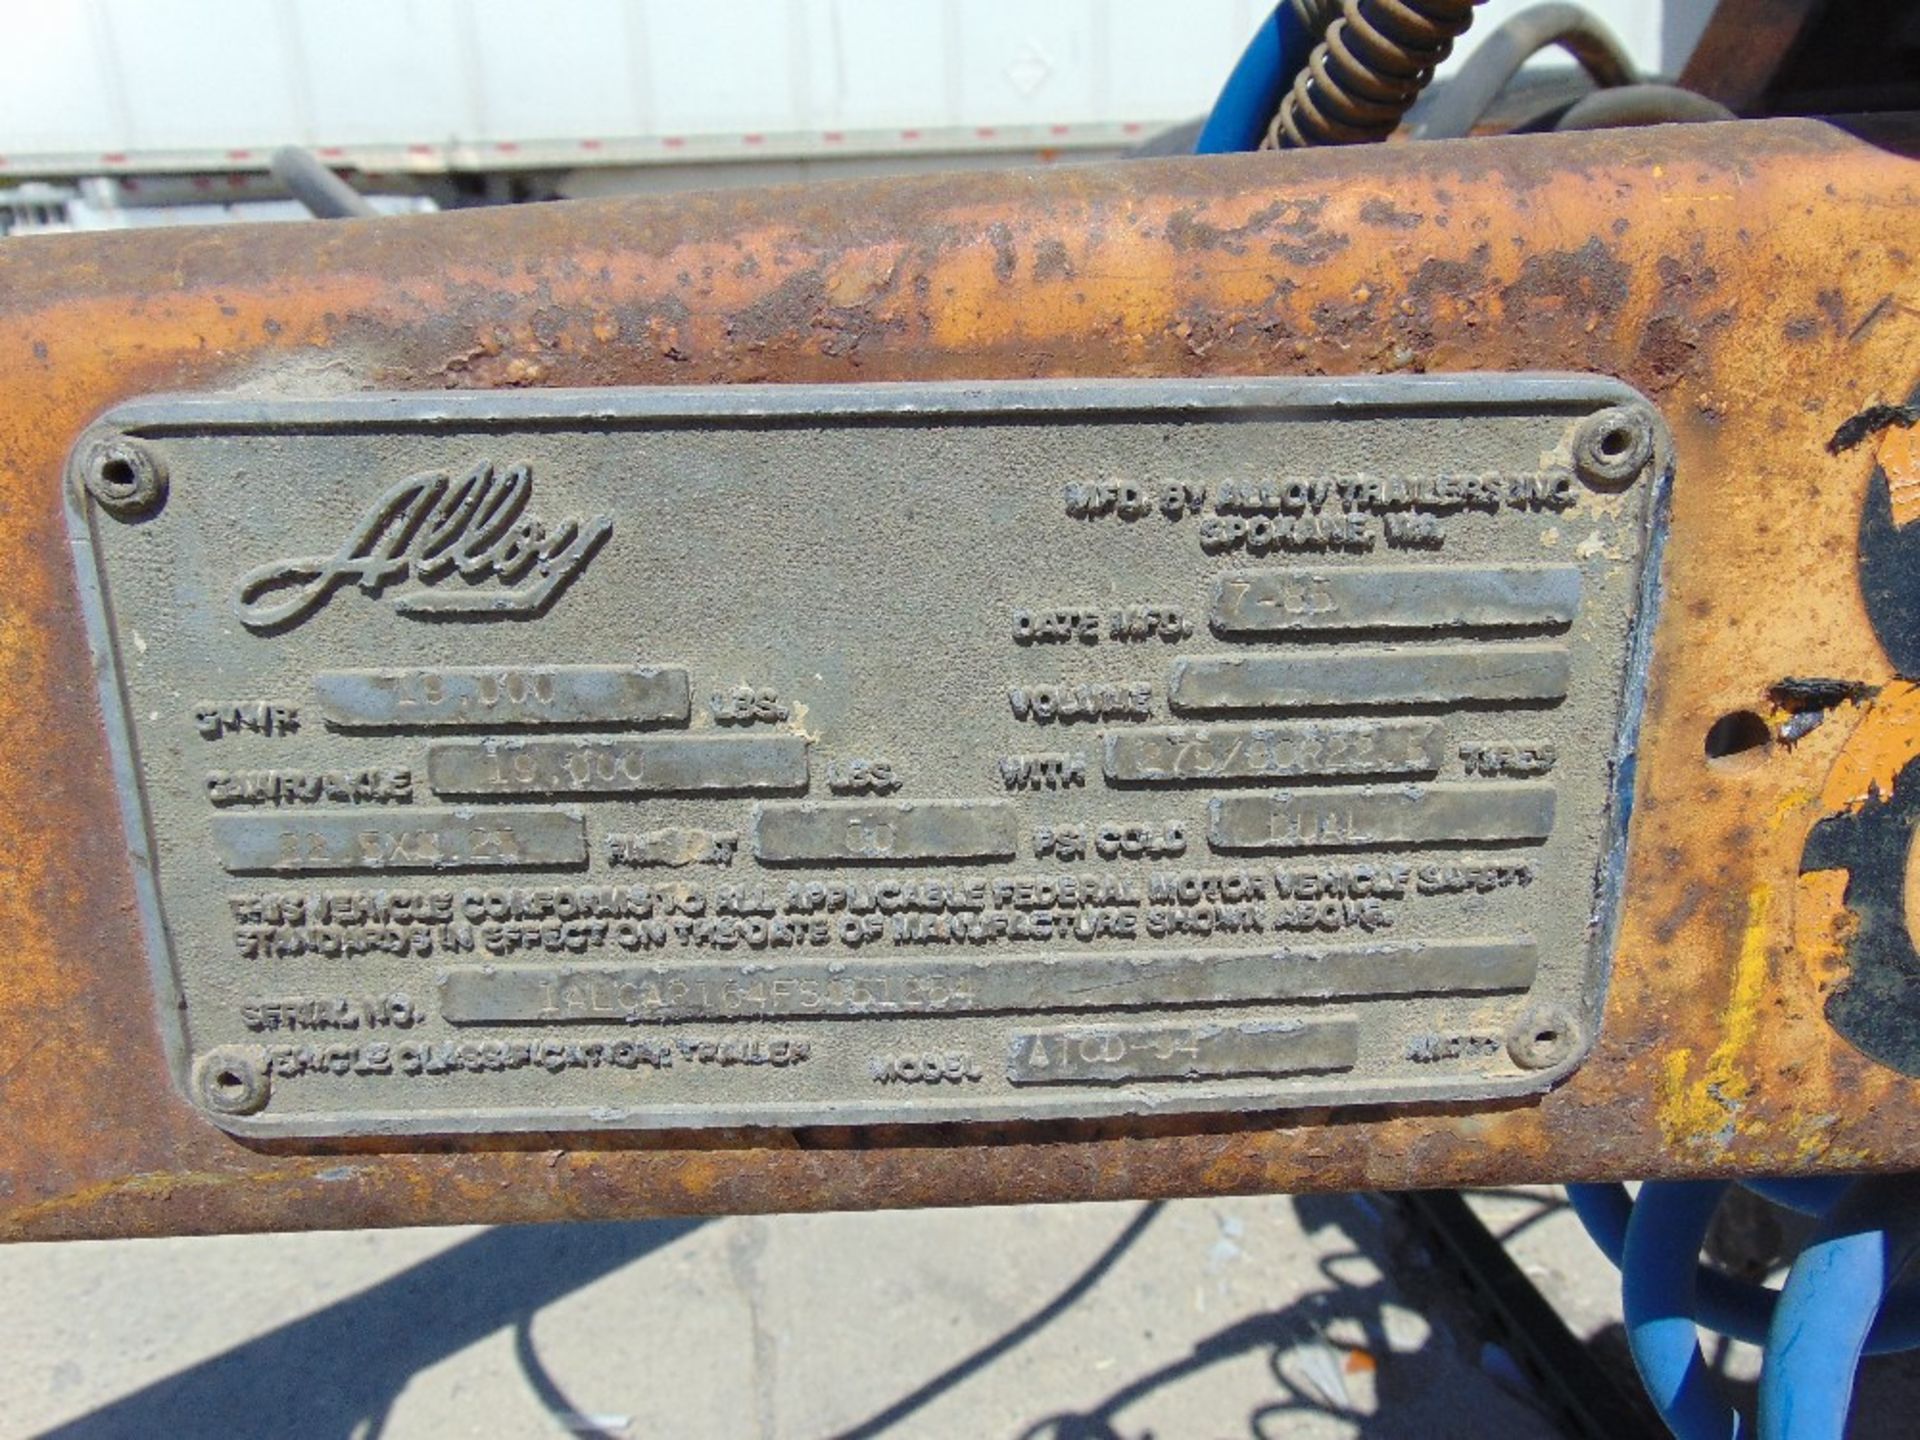 1985 Alloy mod. ATCD-94 Fifth Wheel Hitch, - Image 3 of 3